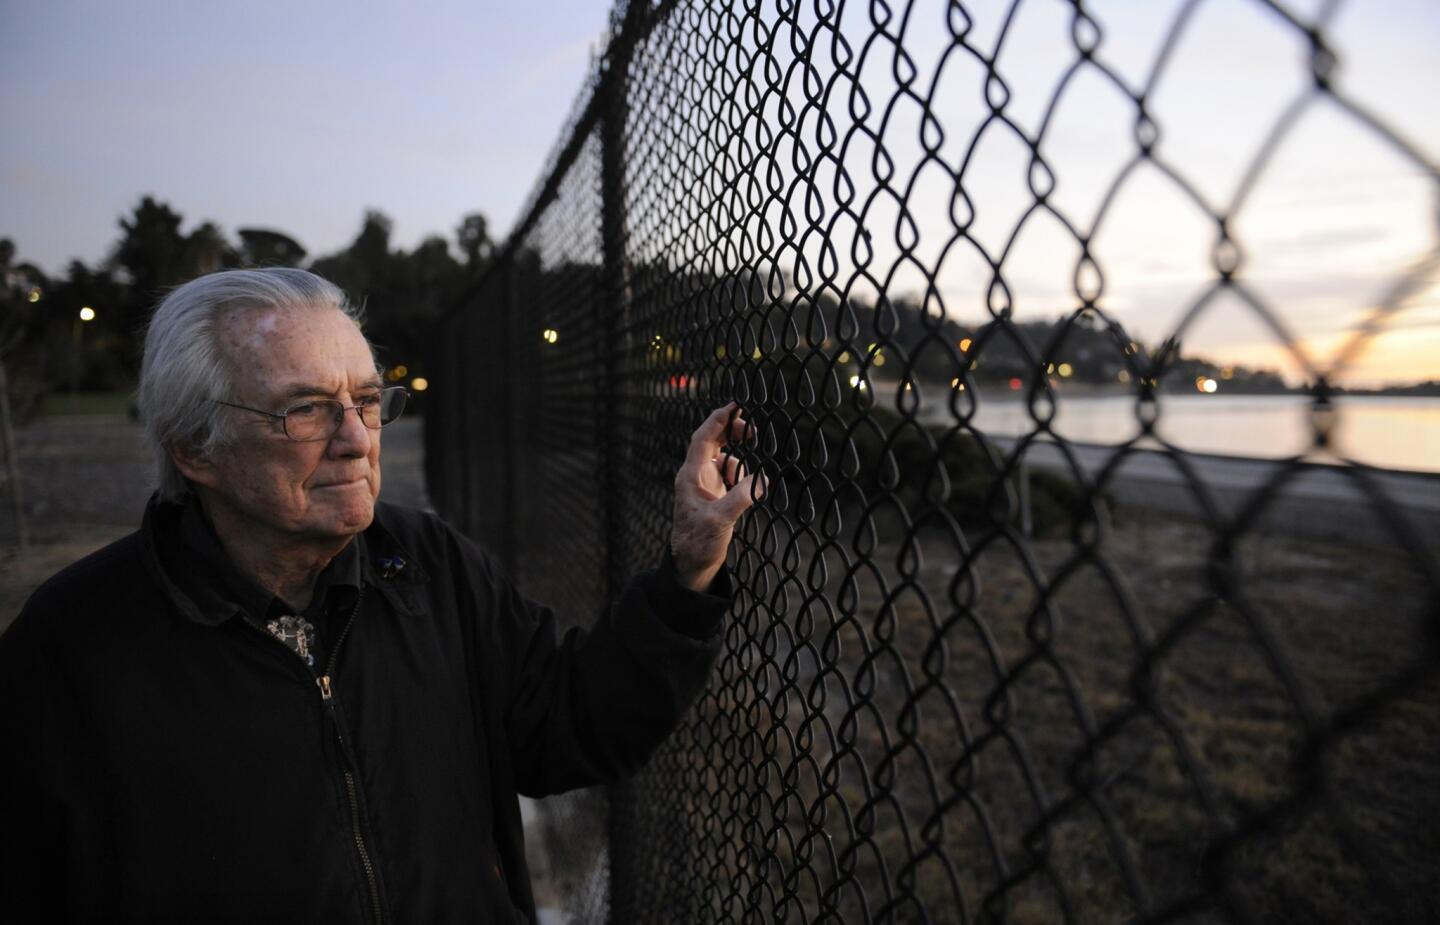 Silver Lake resident Dion Neutra -- an architect who trained under his father, the famed Richard Neutra -- stands at a fence that he wants taken down so the public has access to the reservoir.